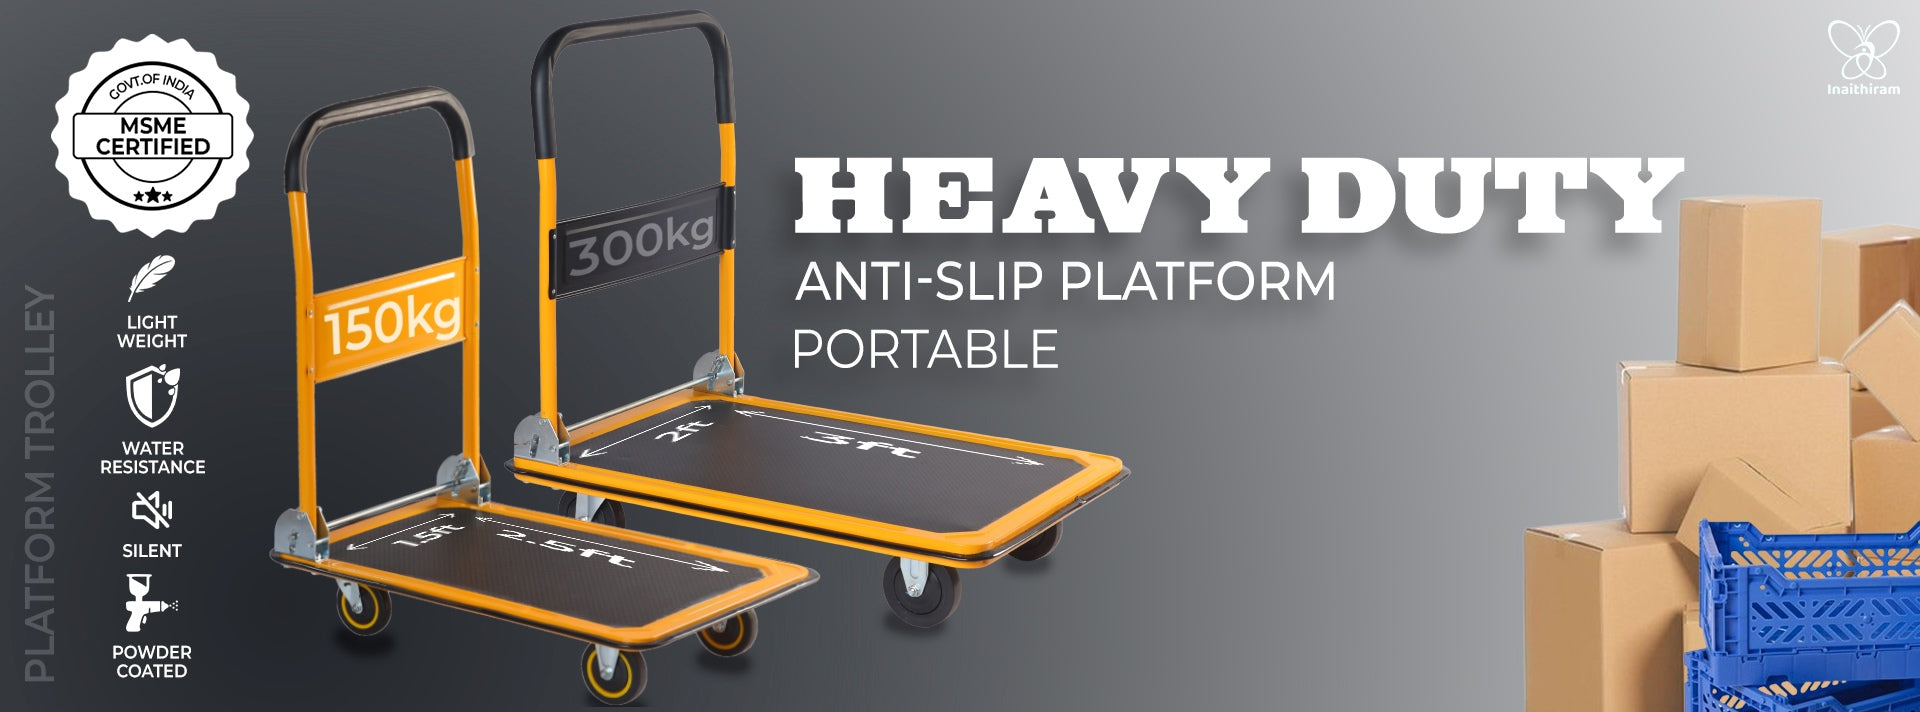 Inaithiram Heavy Duty Metal Platform Trolley for Goods Carrying and Shifting 150kg 300kg capacity